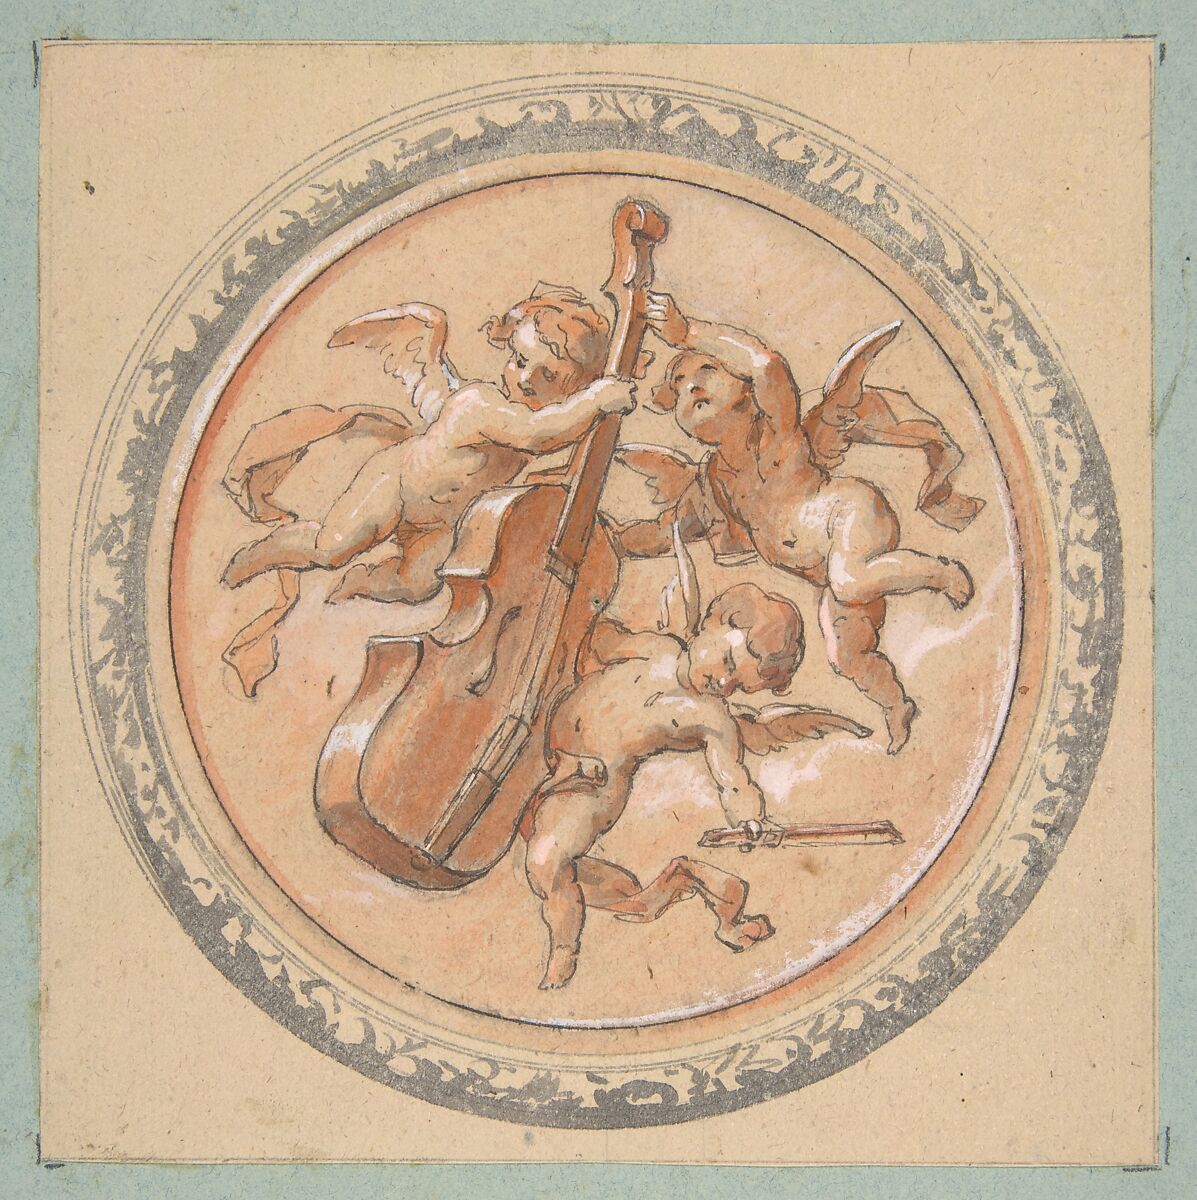 Medallion with putti holding a cello, Jules-Edmond-Charles Lachaise (French, died 1897), Graphite and watercolor 